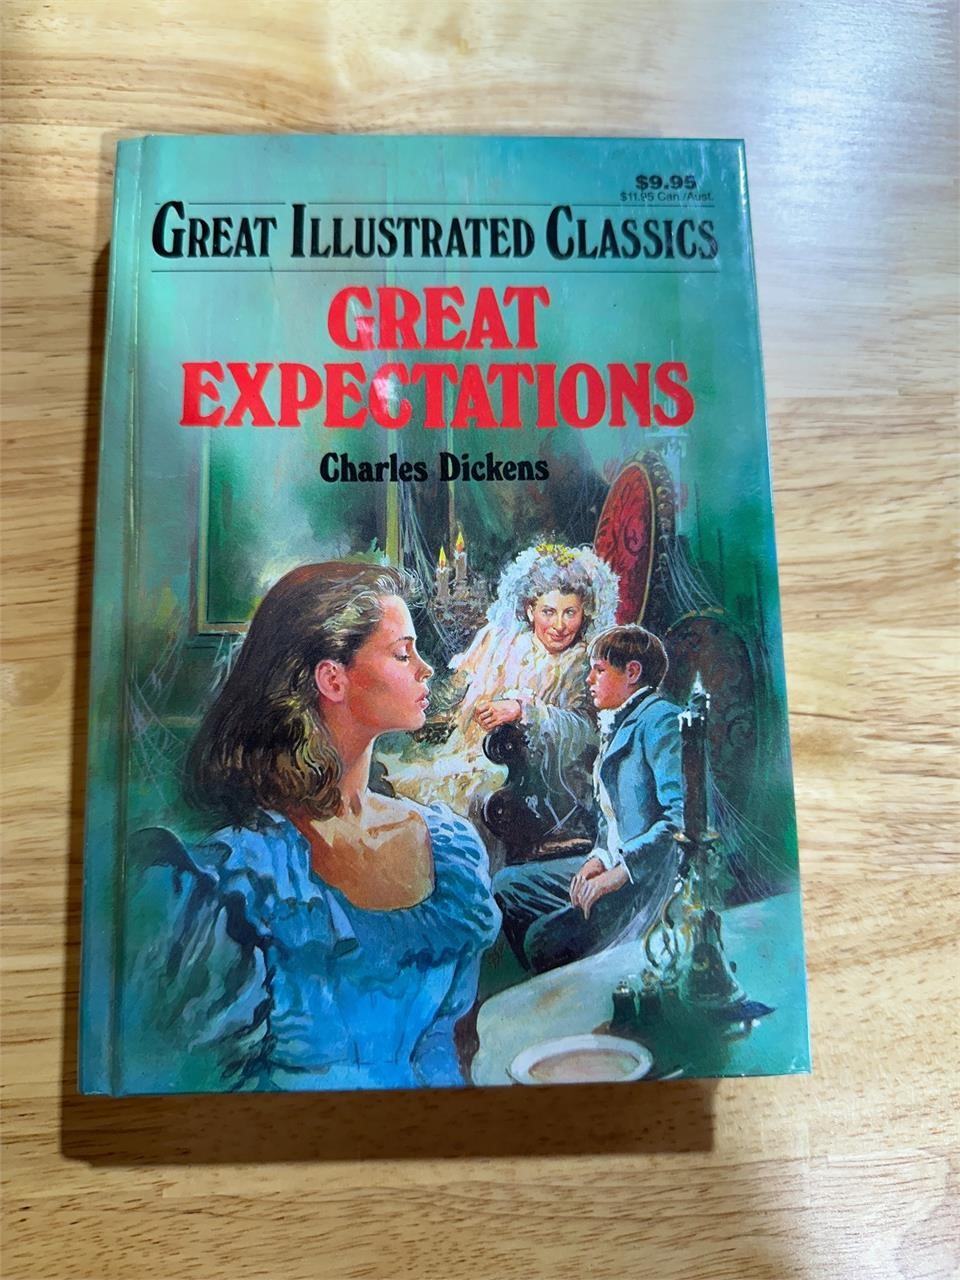 Great expectations by Charles Dickinson